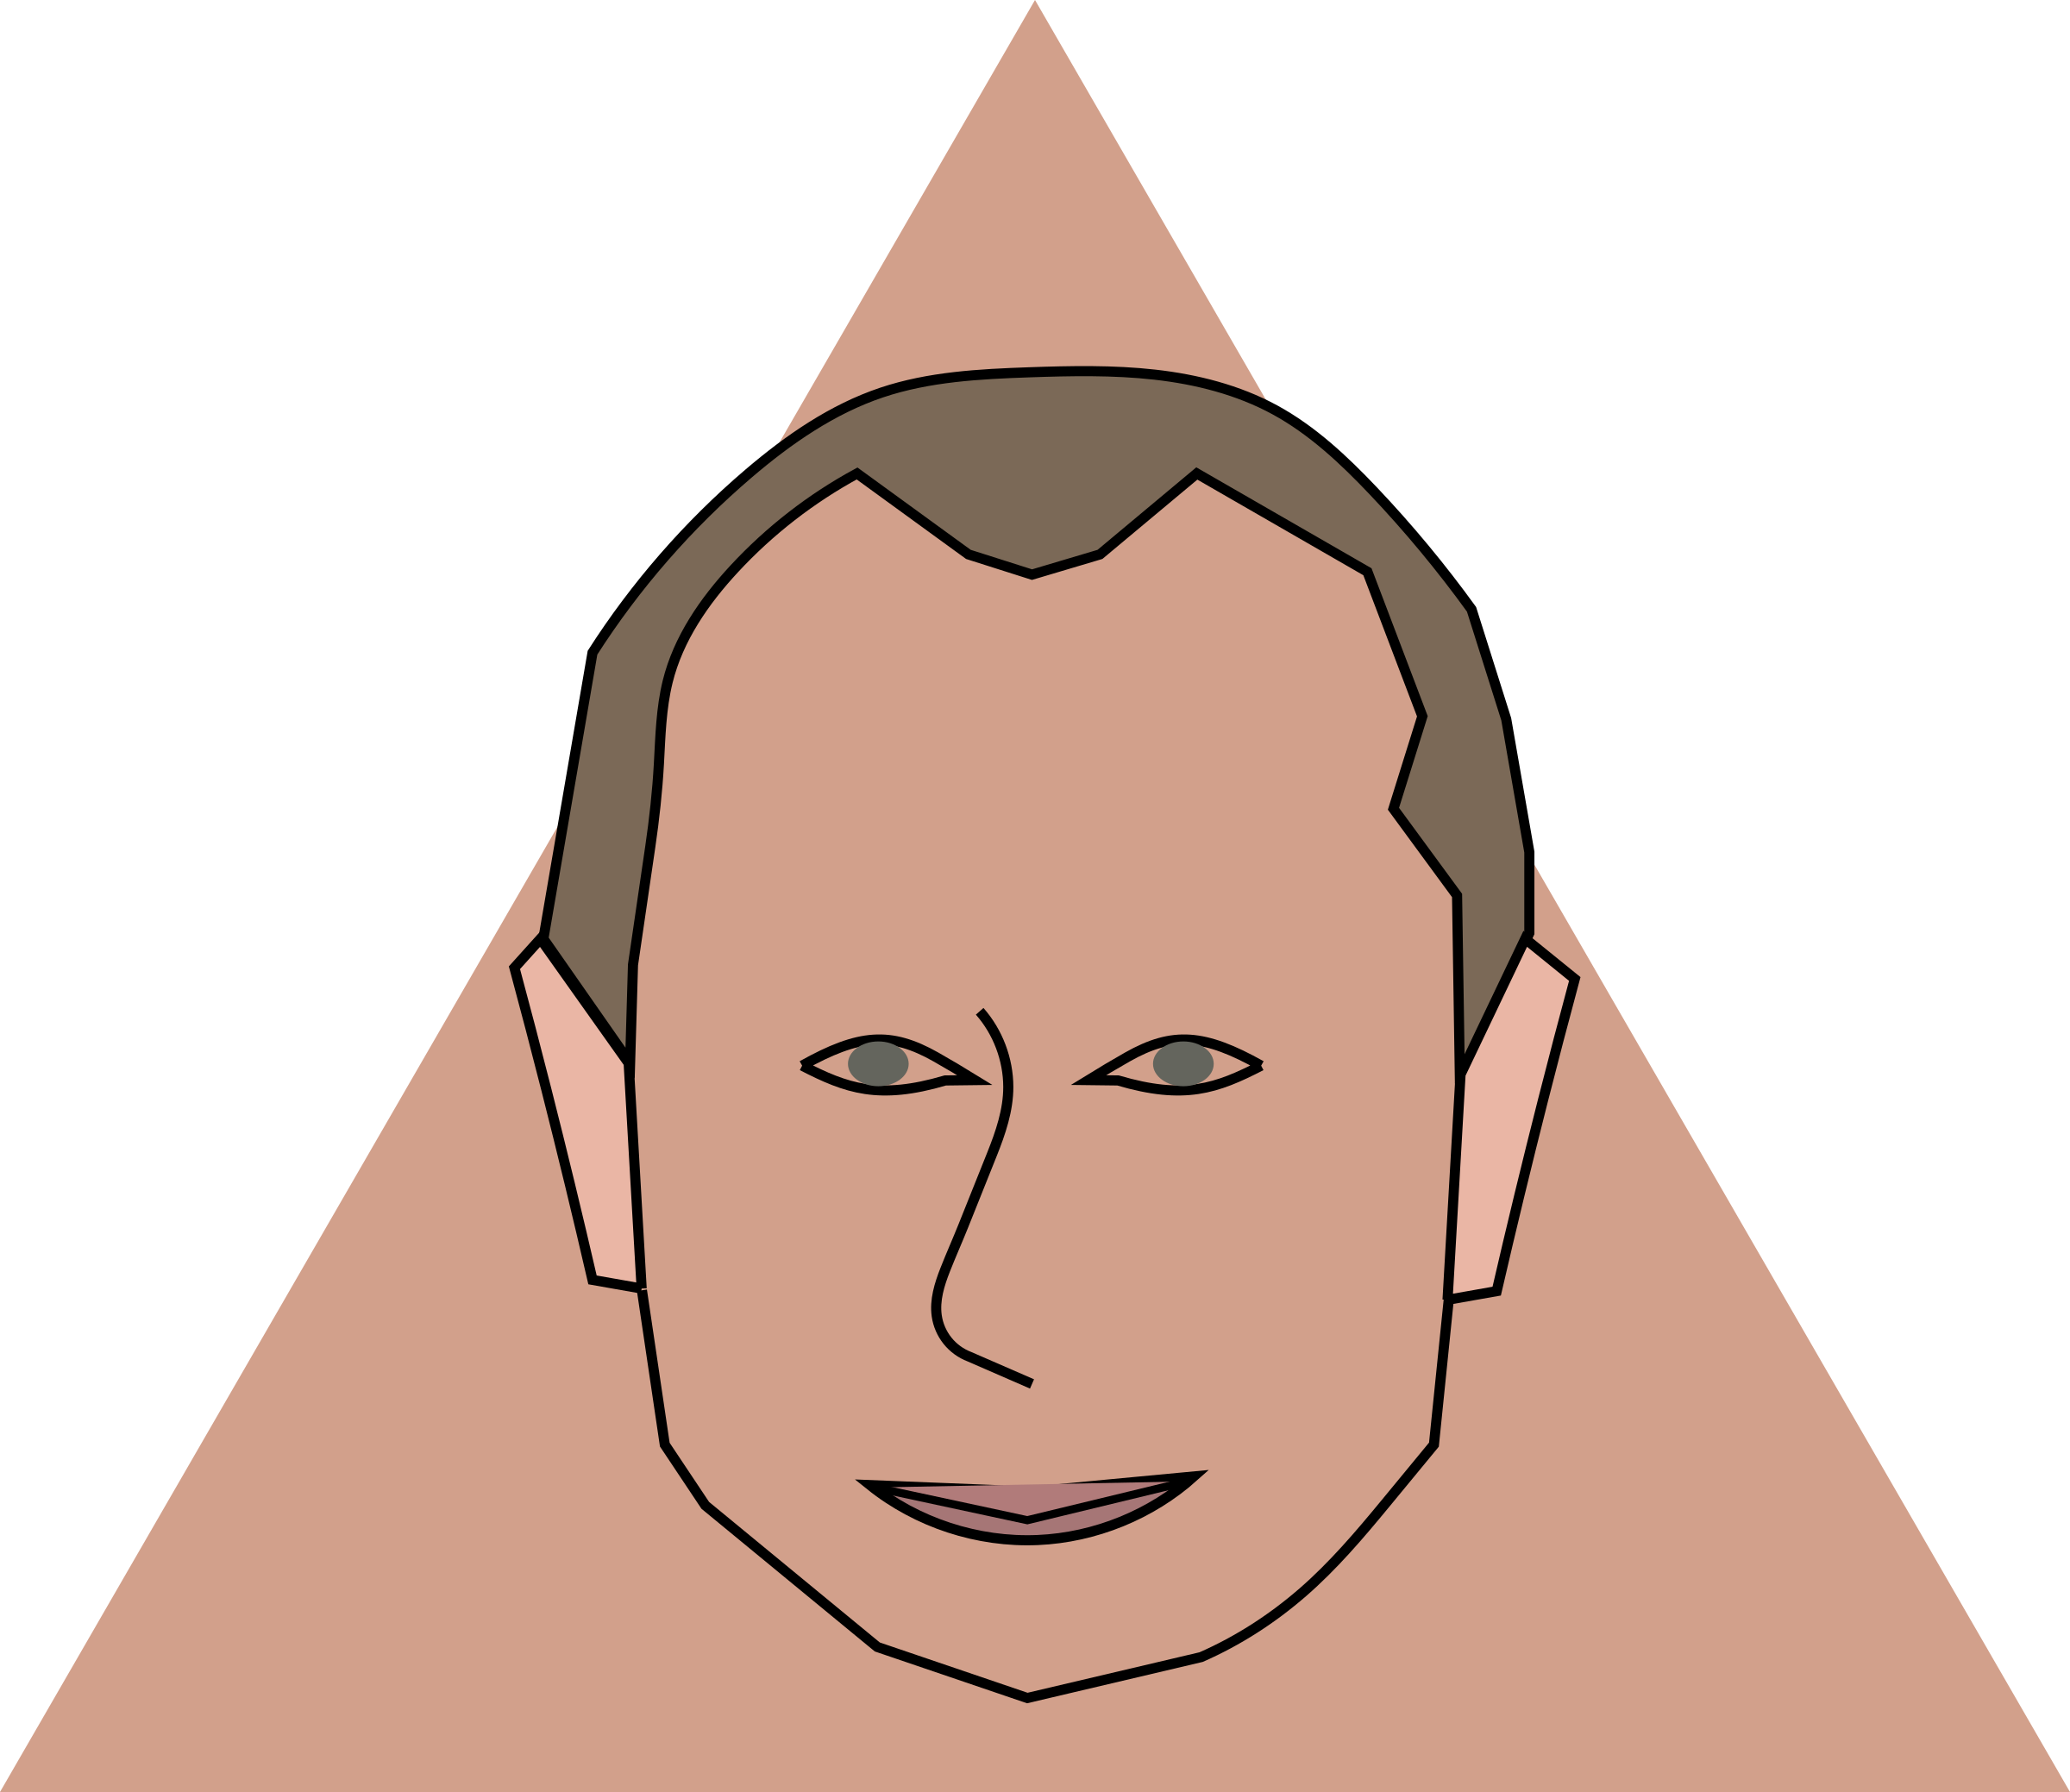 A Man's Face In A Triangle